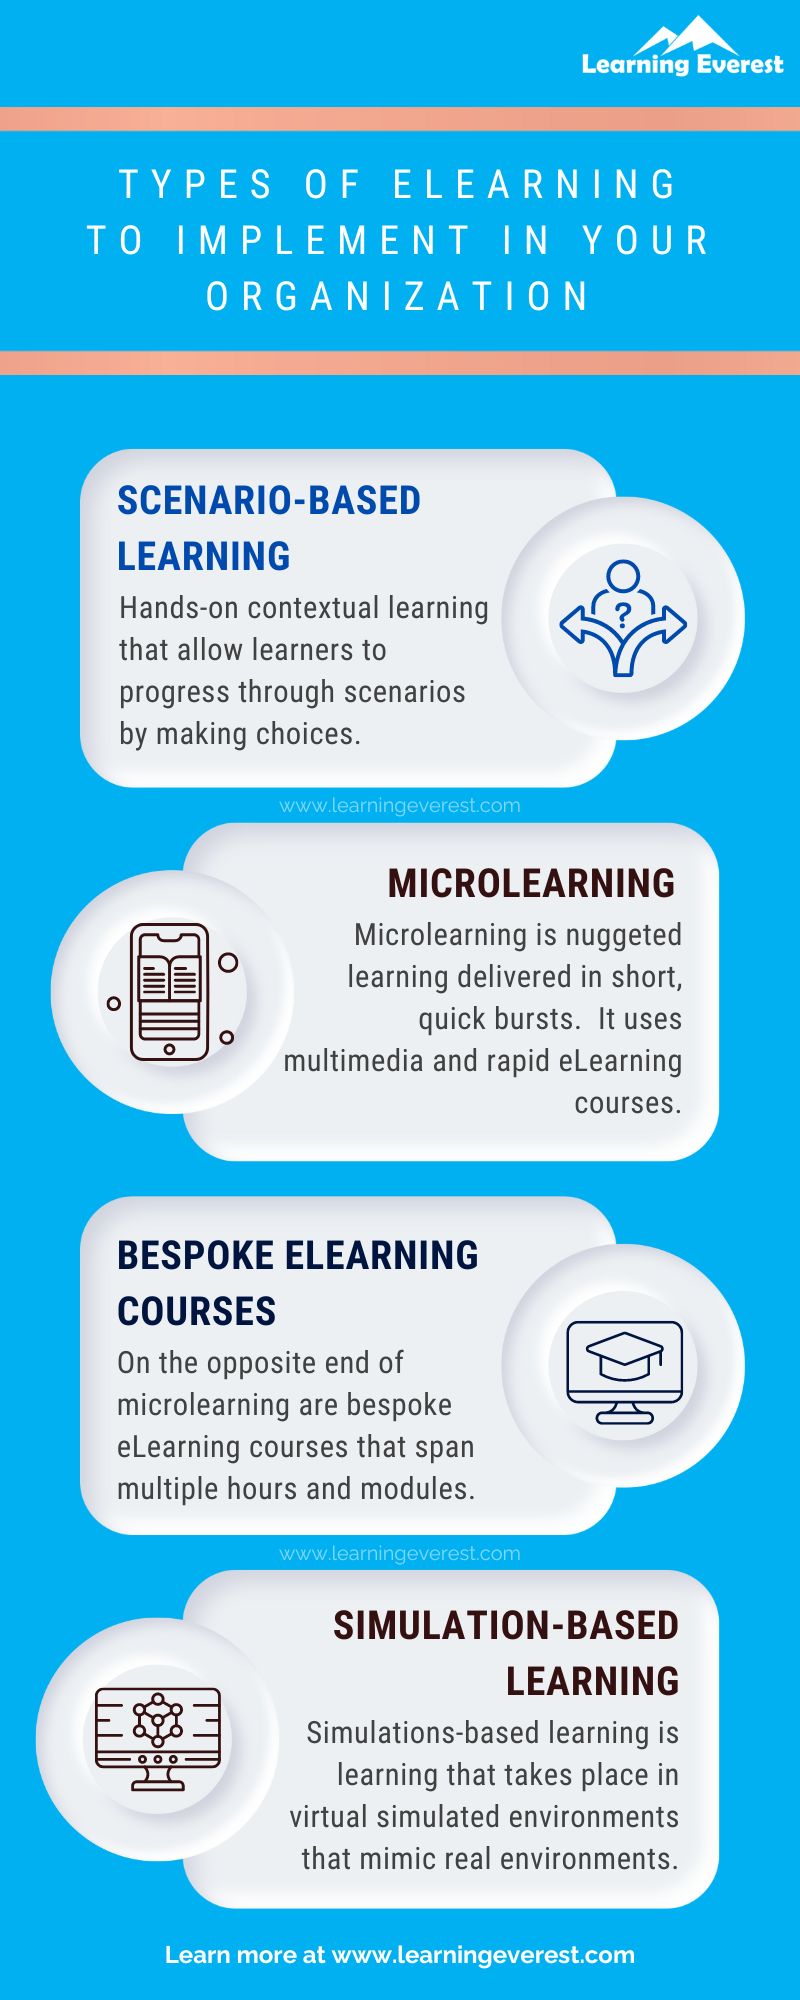 Types of eLearning to Implement in Your Organization